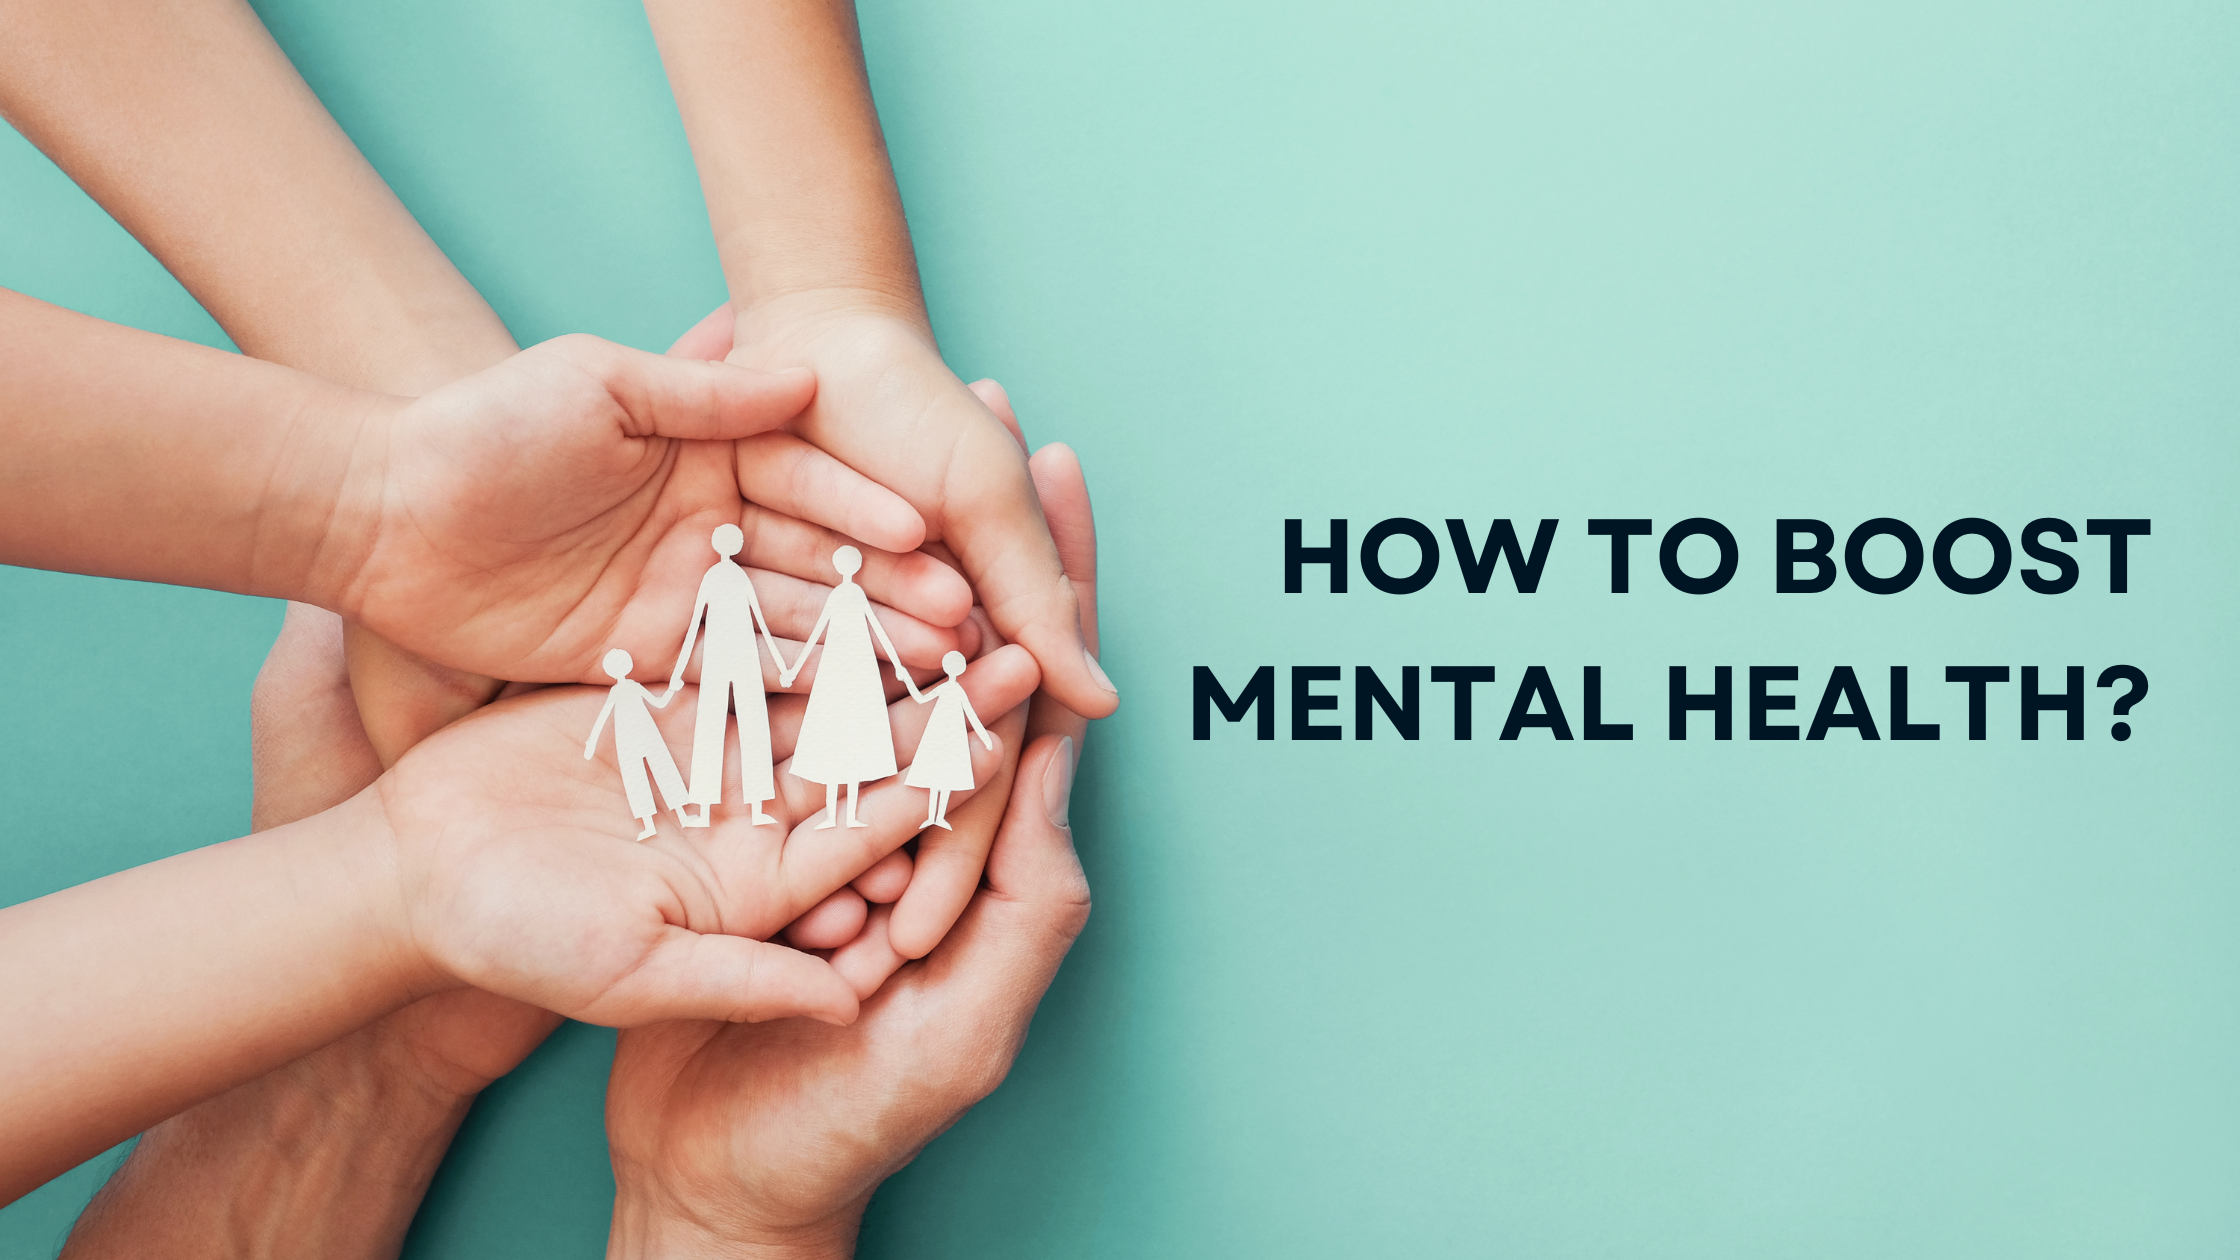 How to Boost Mental Health